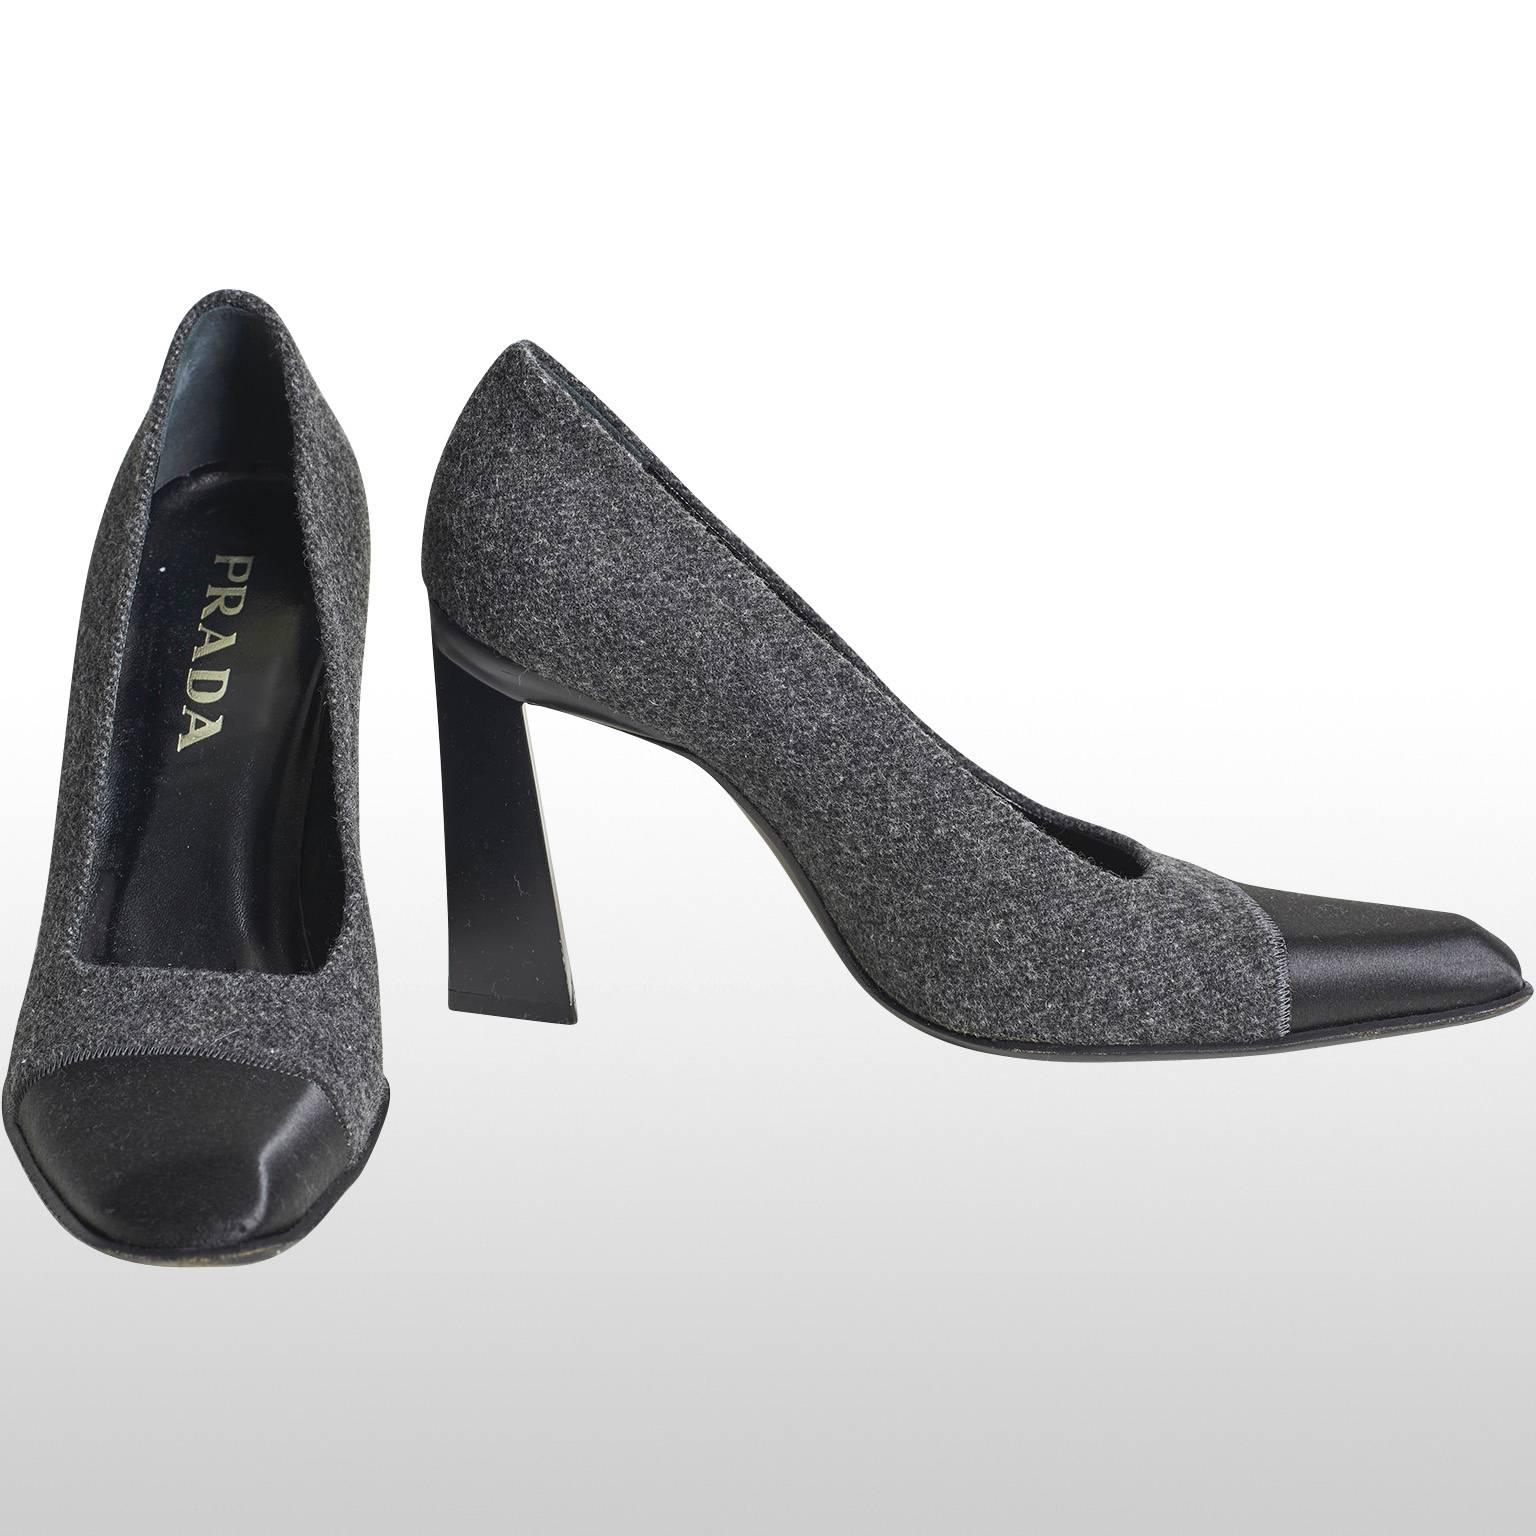 These are beautiful black and grey high heel shoes made by the design house Prada. The black part of the shoe is made out of satin where as the grey part of the shoe is made out of wool. The heel of the shoe is formed of a four inch trapezoid shape.